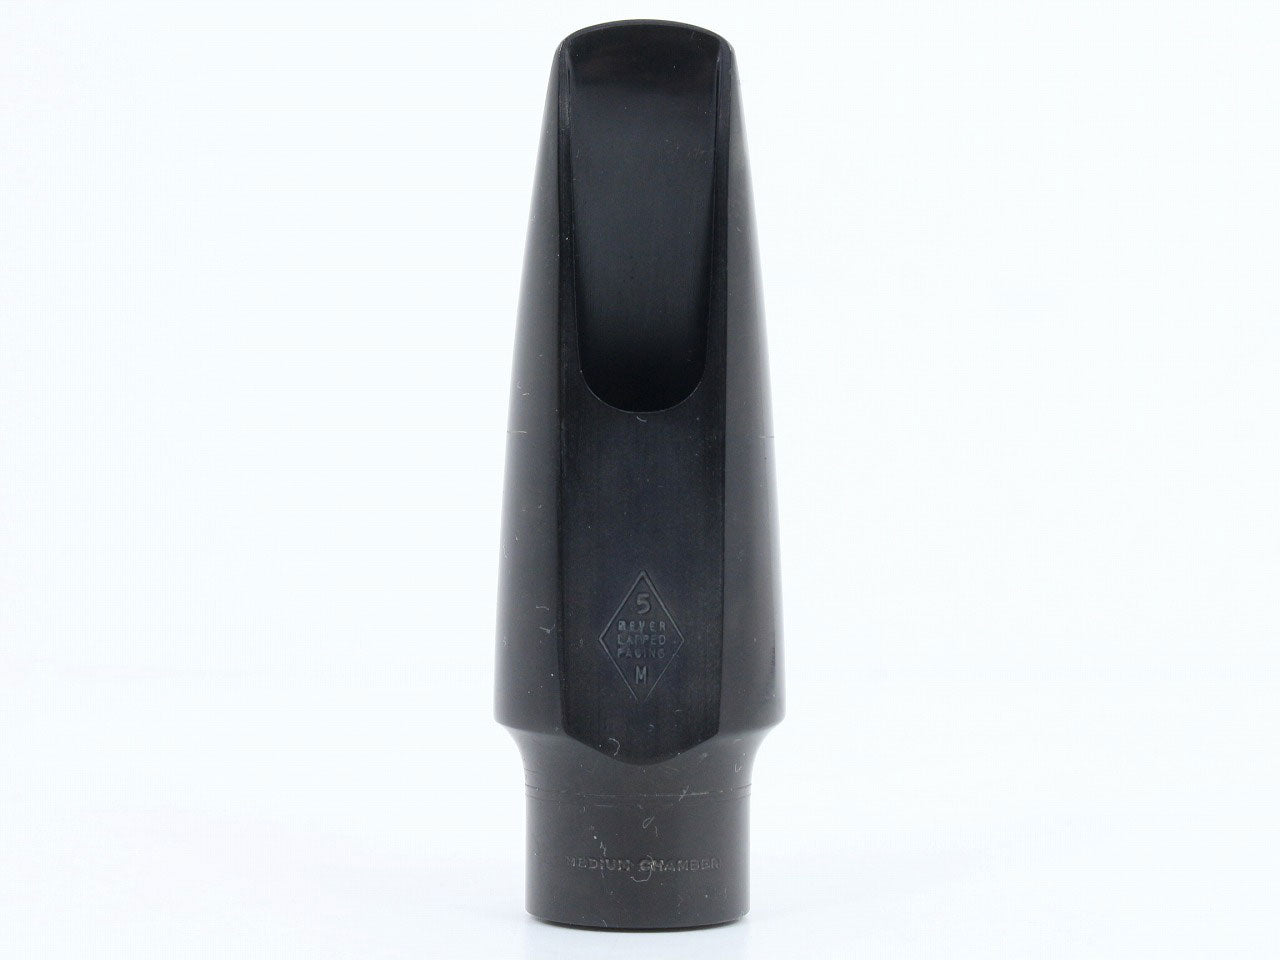 USED MEYER mouthpiece for alto saxophone 5MM [20]